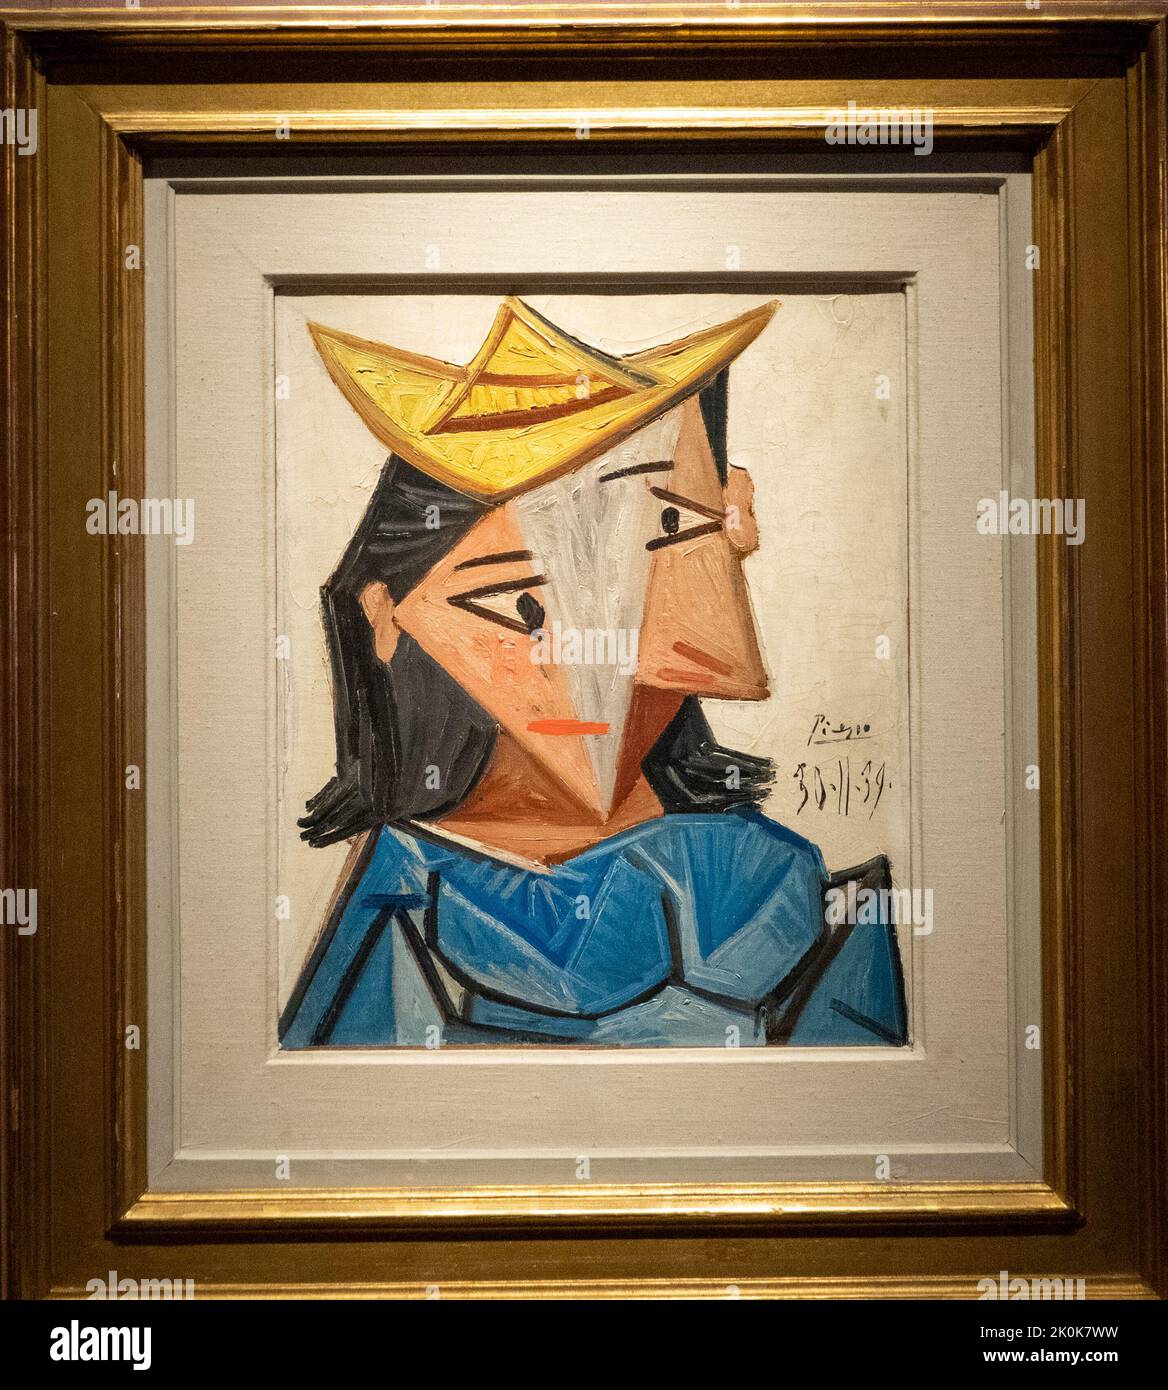 The Straw Hat by Pablo Picasso, 1939 Stock Photo